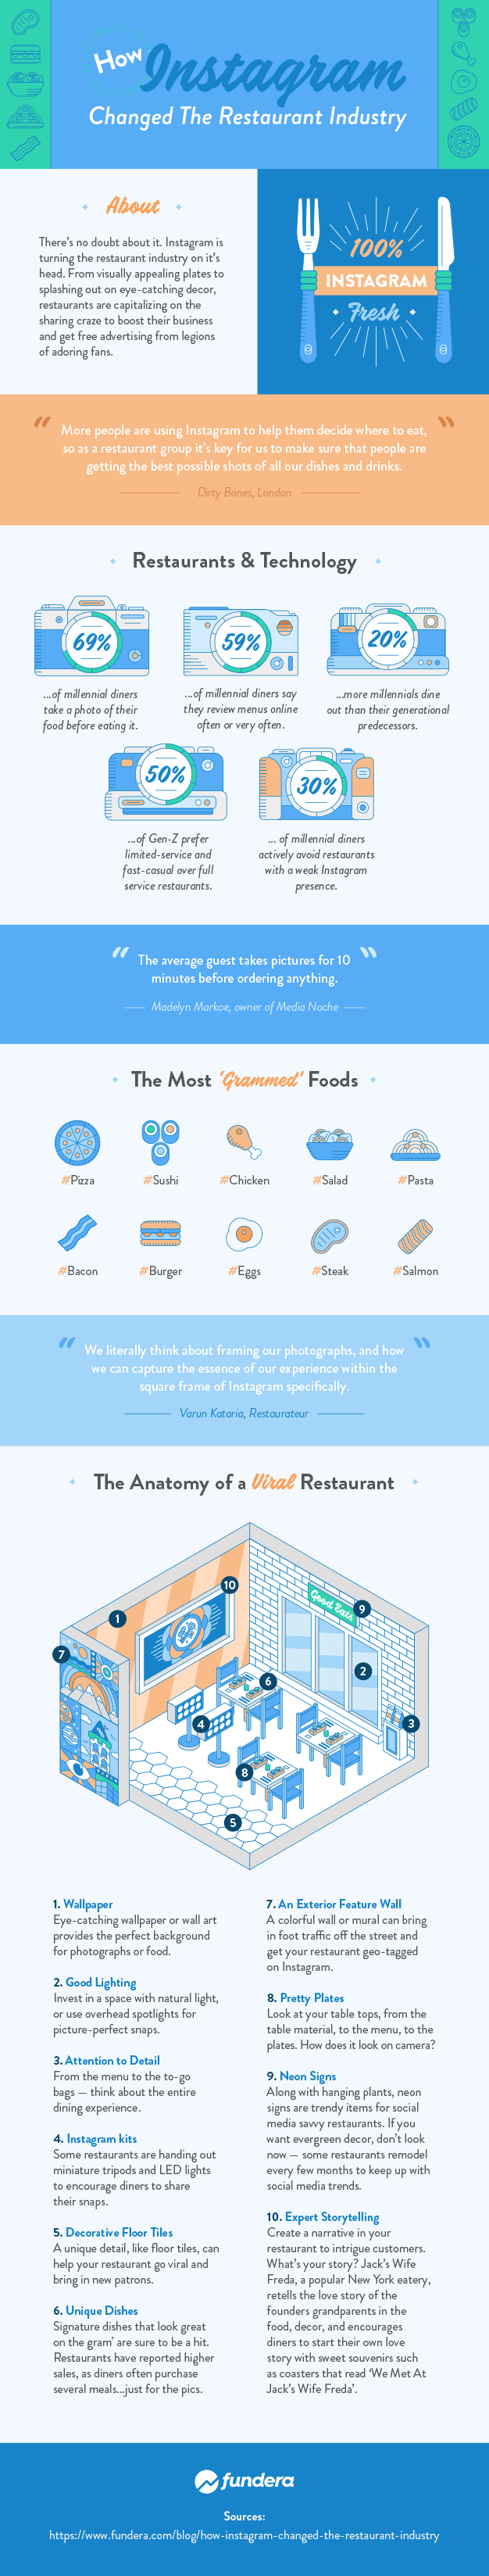 How Instagram Changing The Way We Dine Out INFO graphics